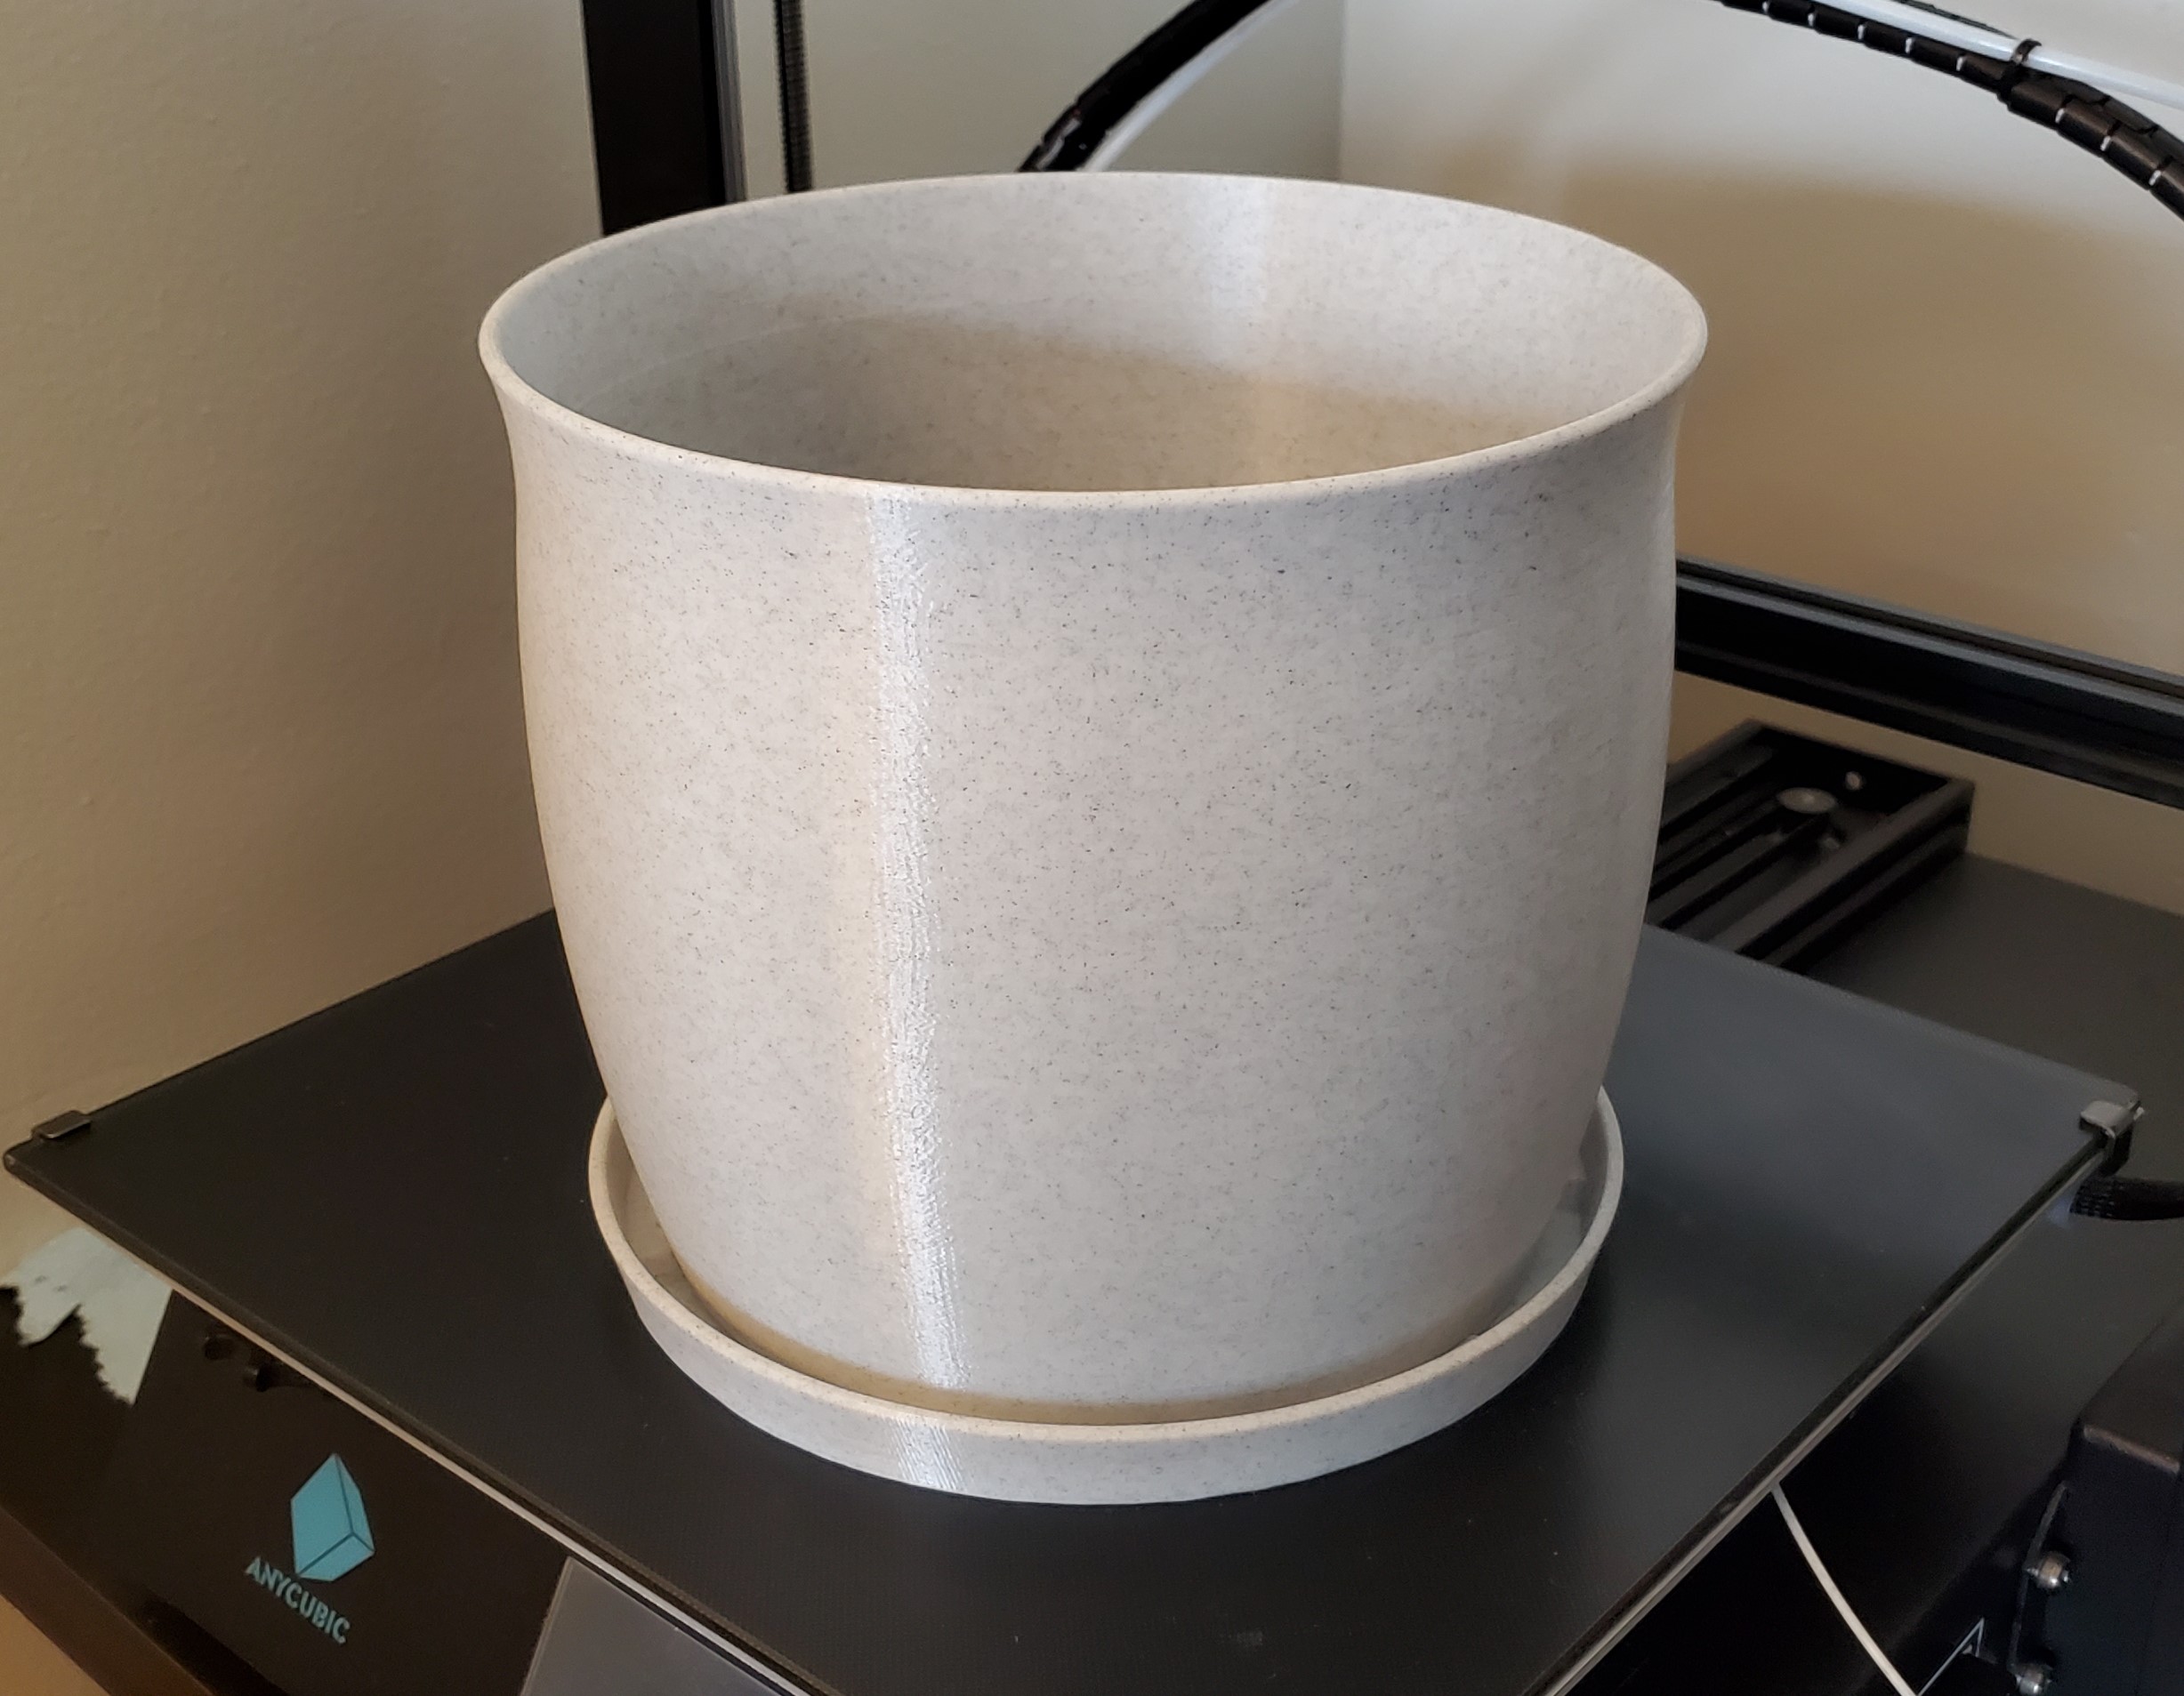 Plant pot and saucer in cauldron shape